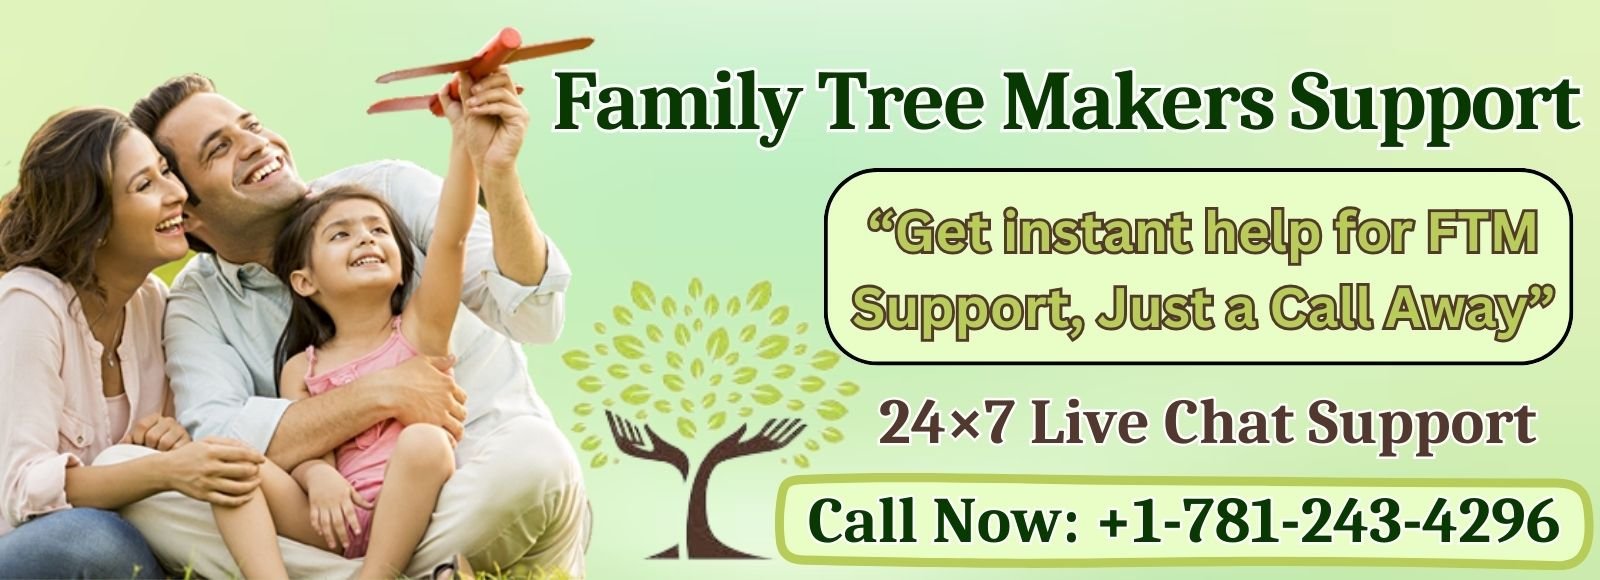 Family Tree Makers Support